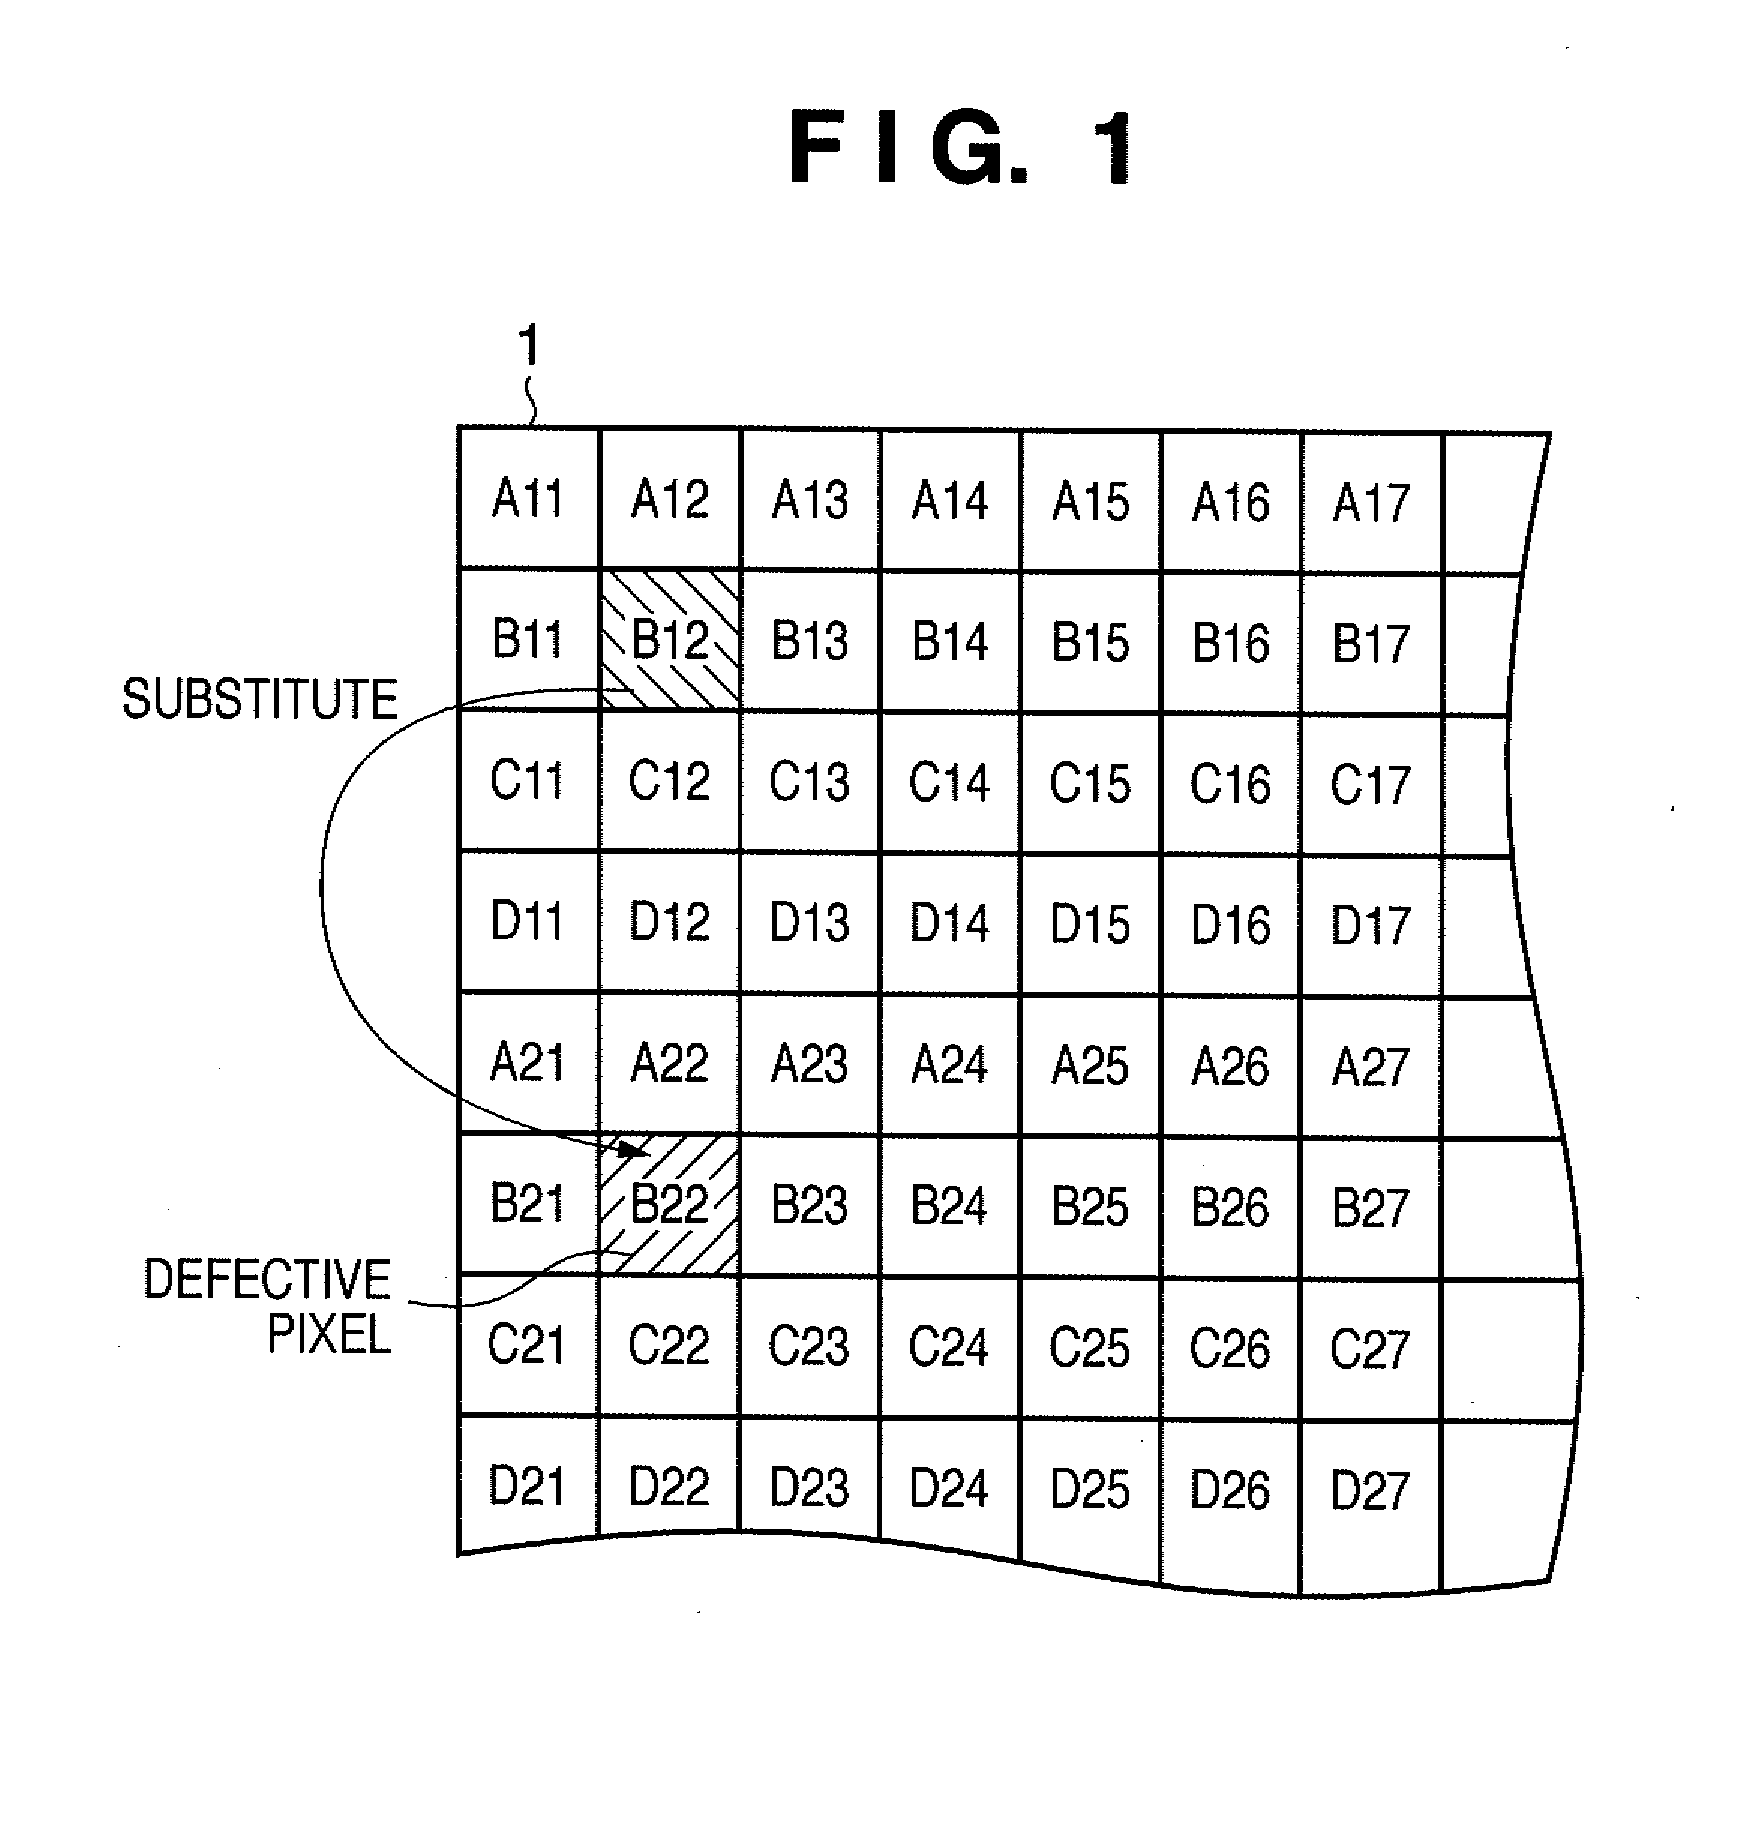 Image capturing system, signal processing circuit, and signal processing method